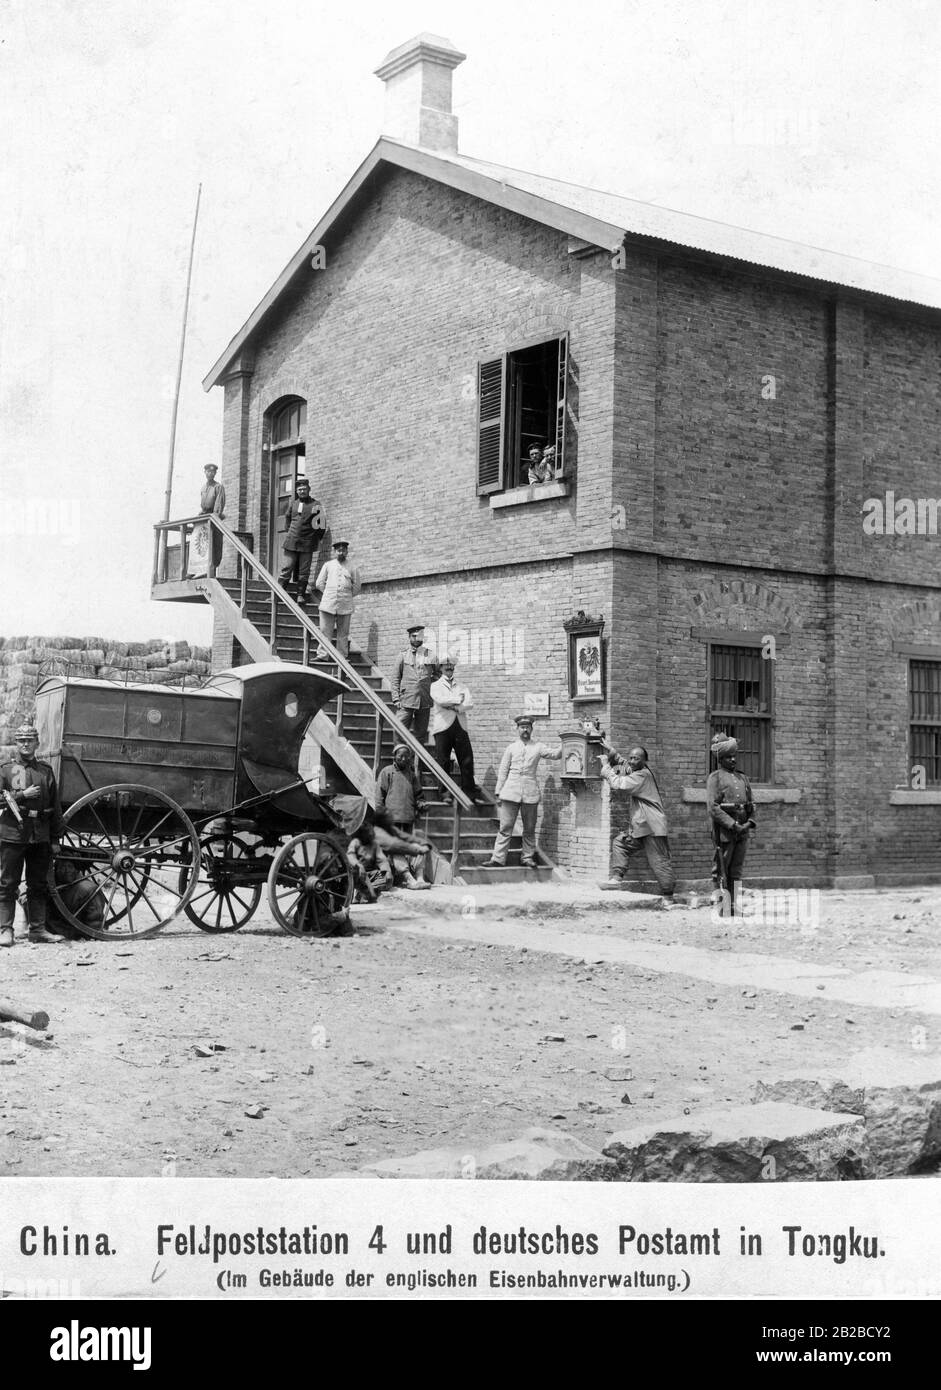 The German Feldpoststation 4 (field post station) and the German post office set up in Tongku in the building of the British railway administration. A German and an Indian military post secure the field post station against Chinese raids during the Boxer uprising. Undated photo. Stock Photo